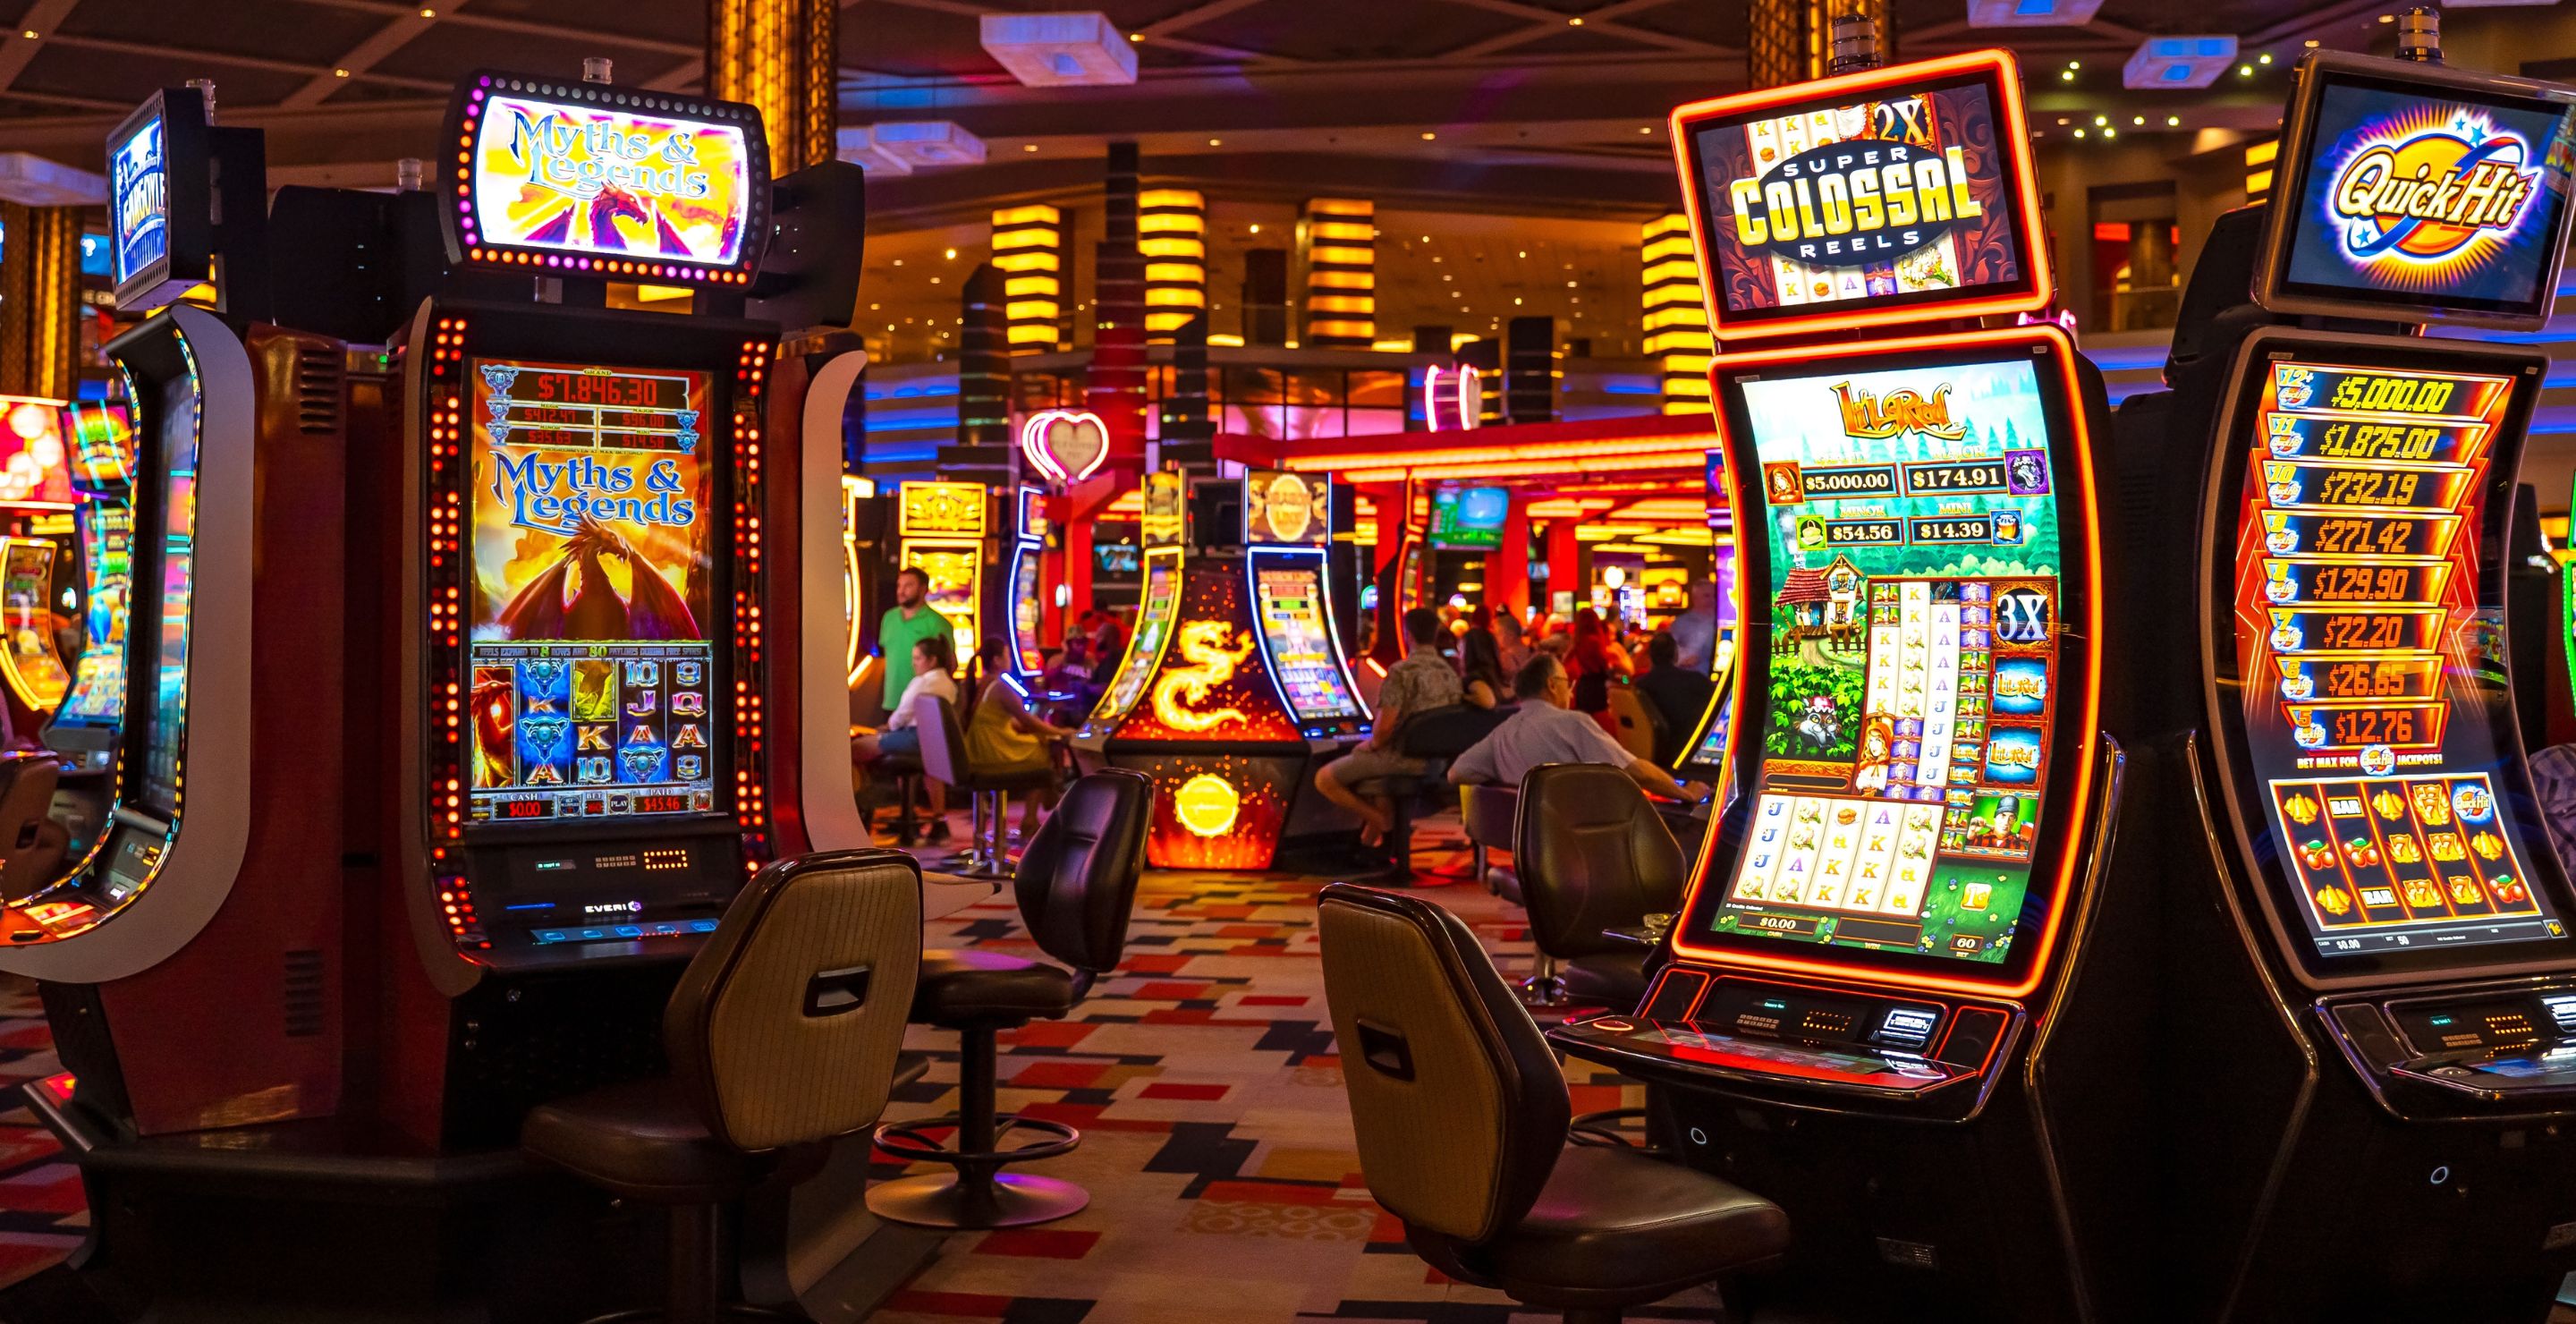 Chaos At Slot Machines As Soon-To-Be-Closed Nevada Casino Seeks To Pay Out $1.6 Million